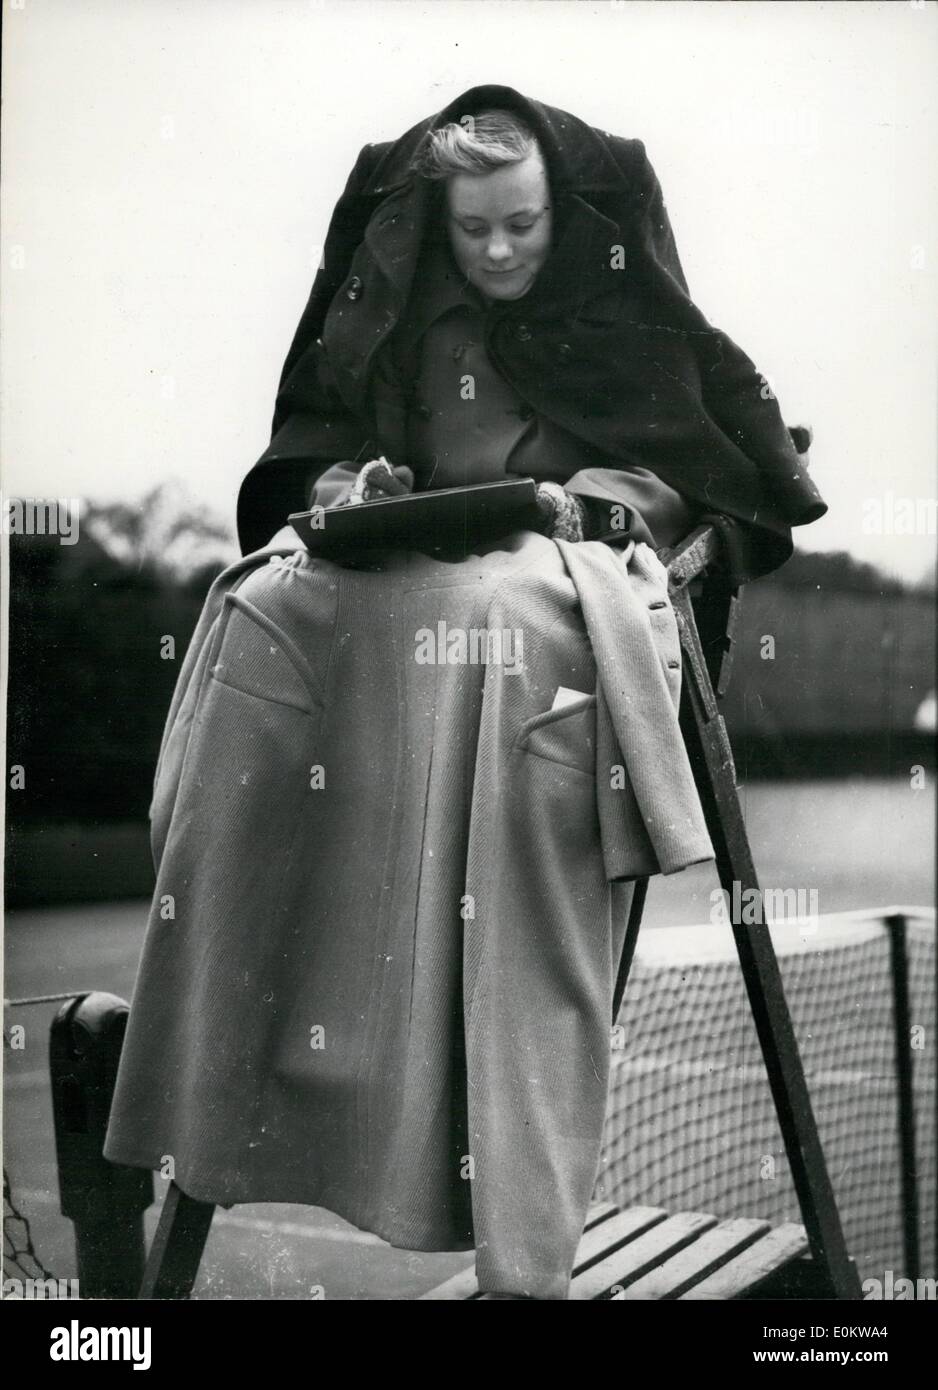 Apr. 24, 1950 - 24-4-50 Fourteen year old umpire well protected against the April weather at tennis tournament Ã¢â‚¬â€œ Play in Stock Photo